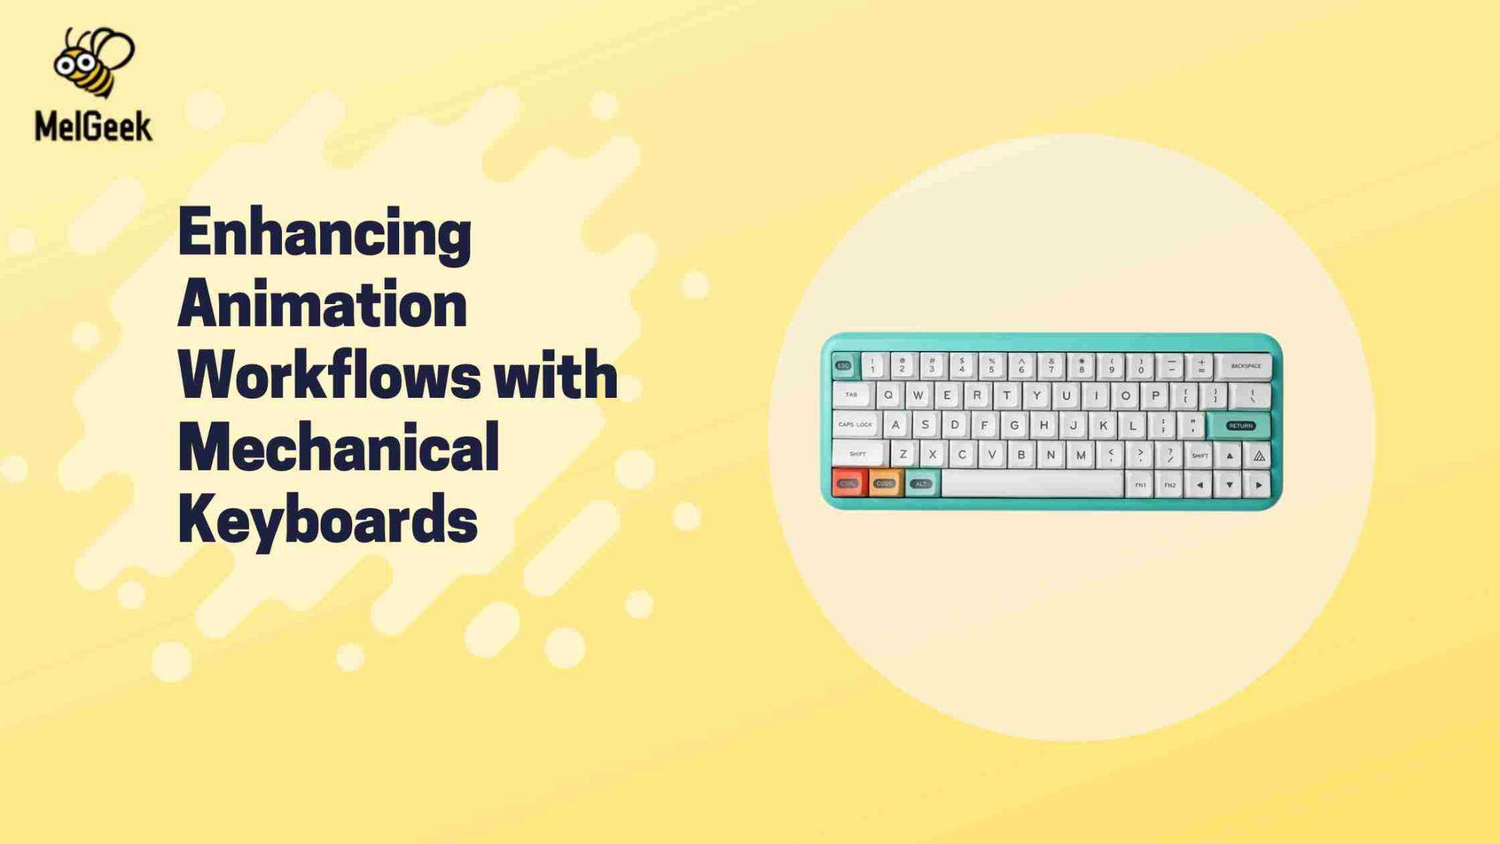 Enhancing Animation Workflows with Mechanical Keyboards